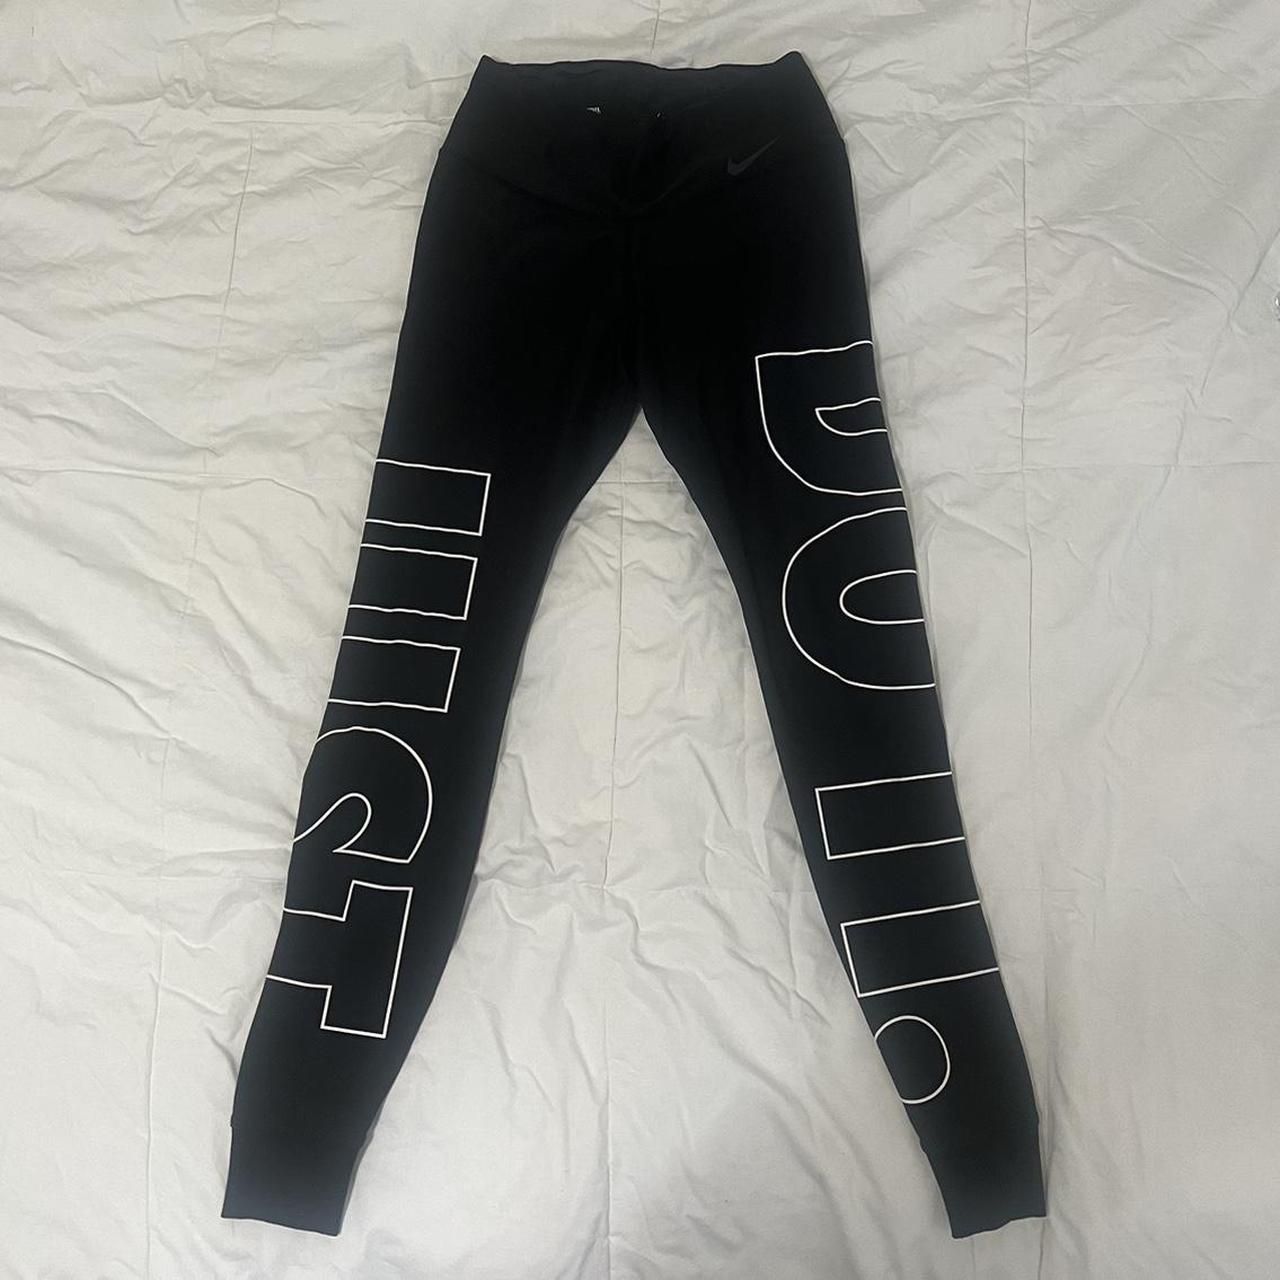 Nike “Just Do It” leggings size XS. Never worn